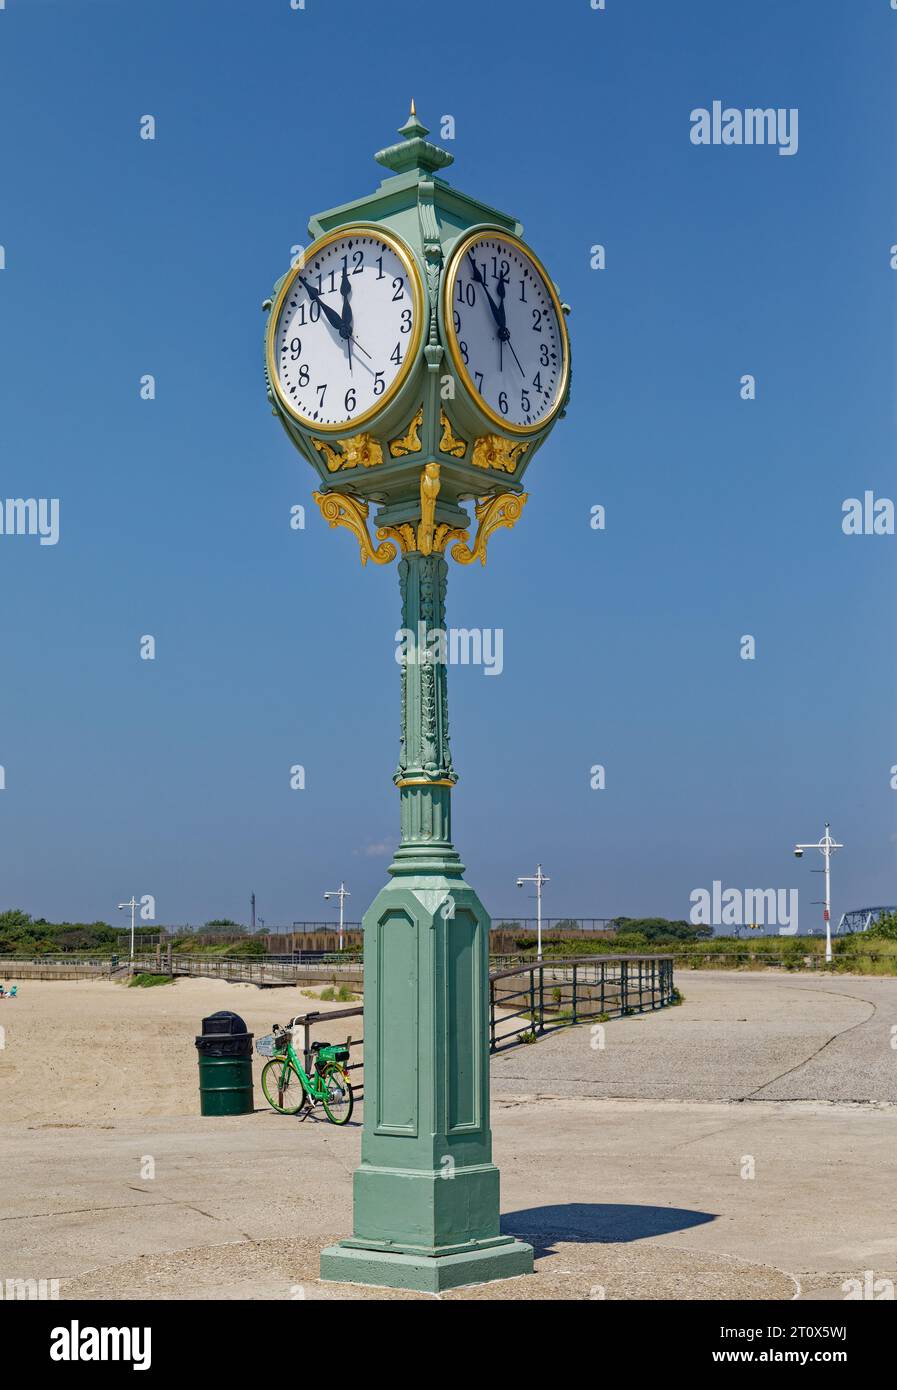 The National Park Service restored the Wise Clock at Jacob Riis Park in 2019, a few months before this photo. Stock Photo